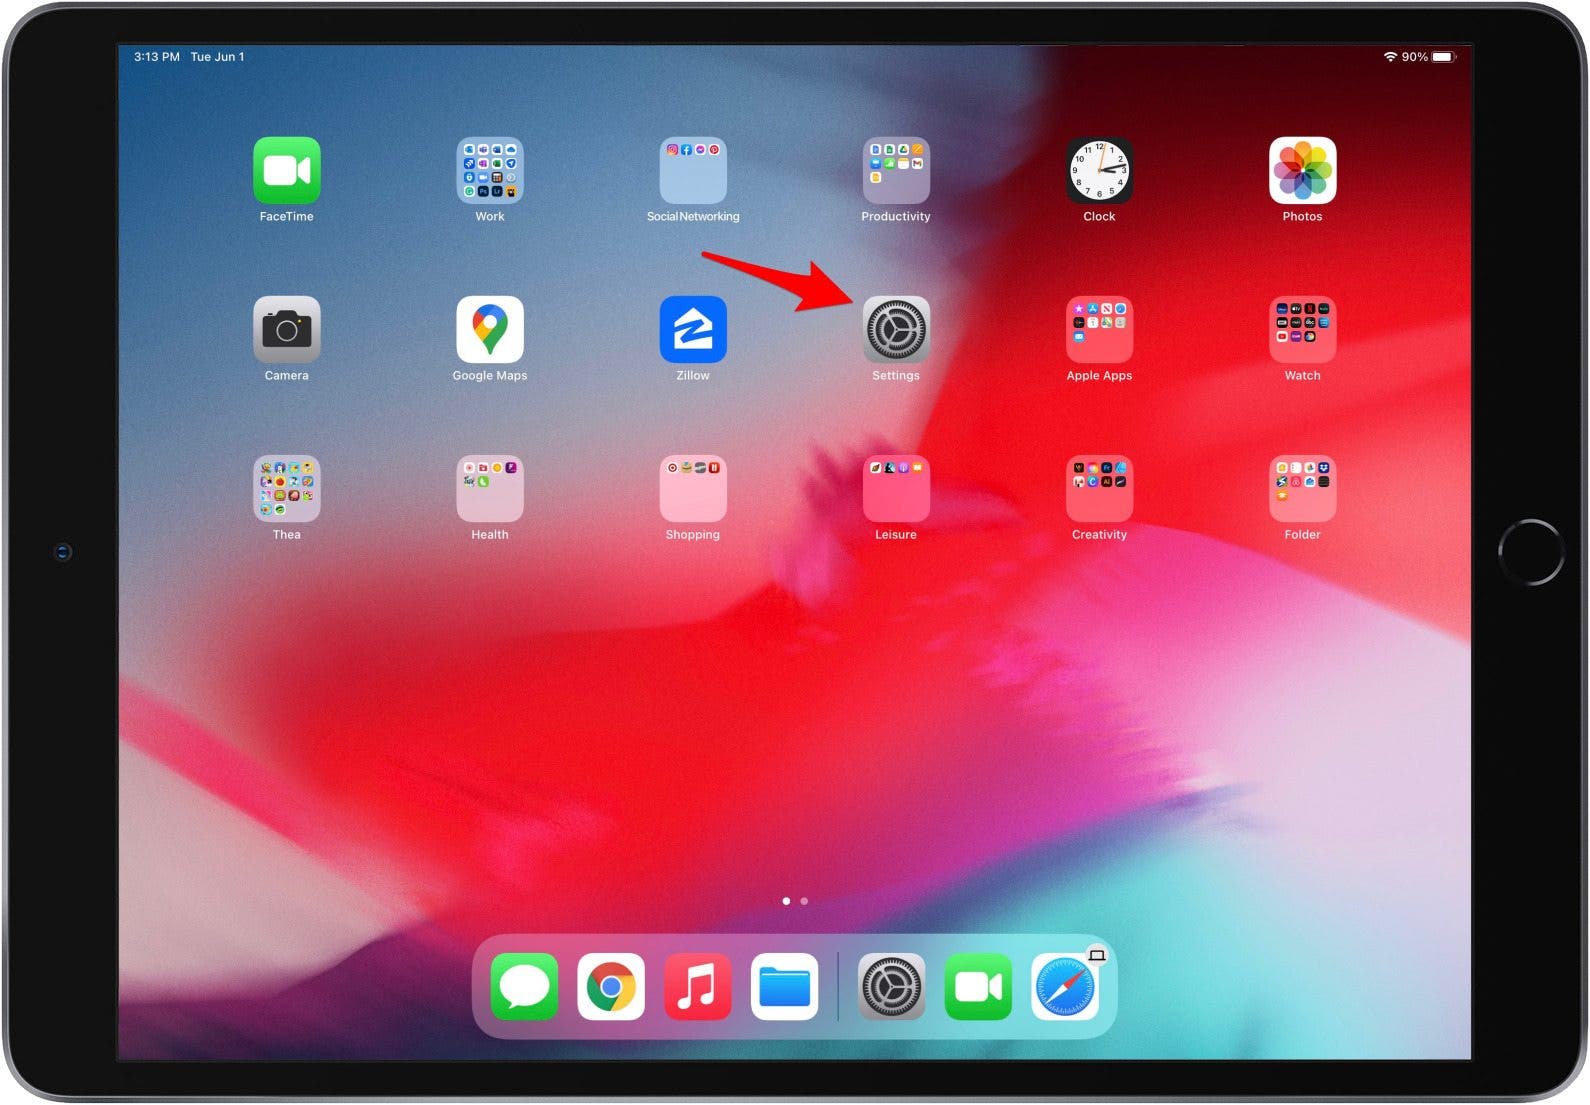 How to factory reset iPad